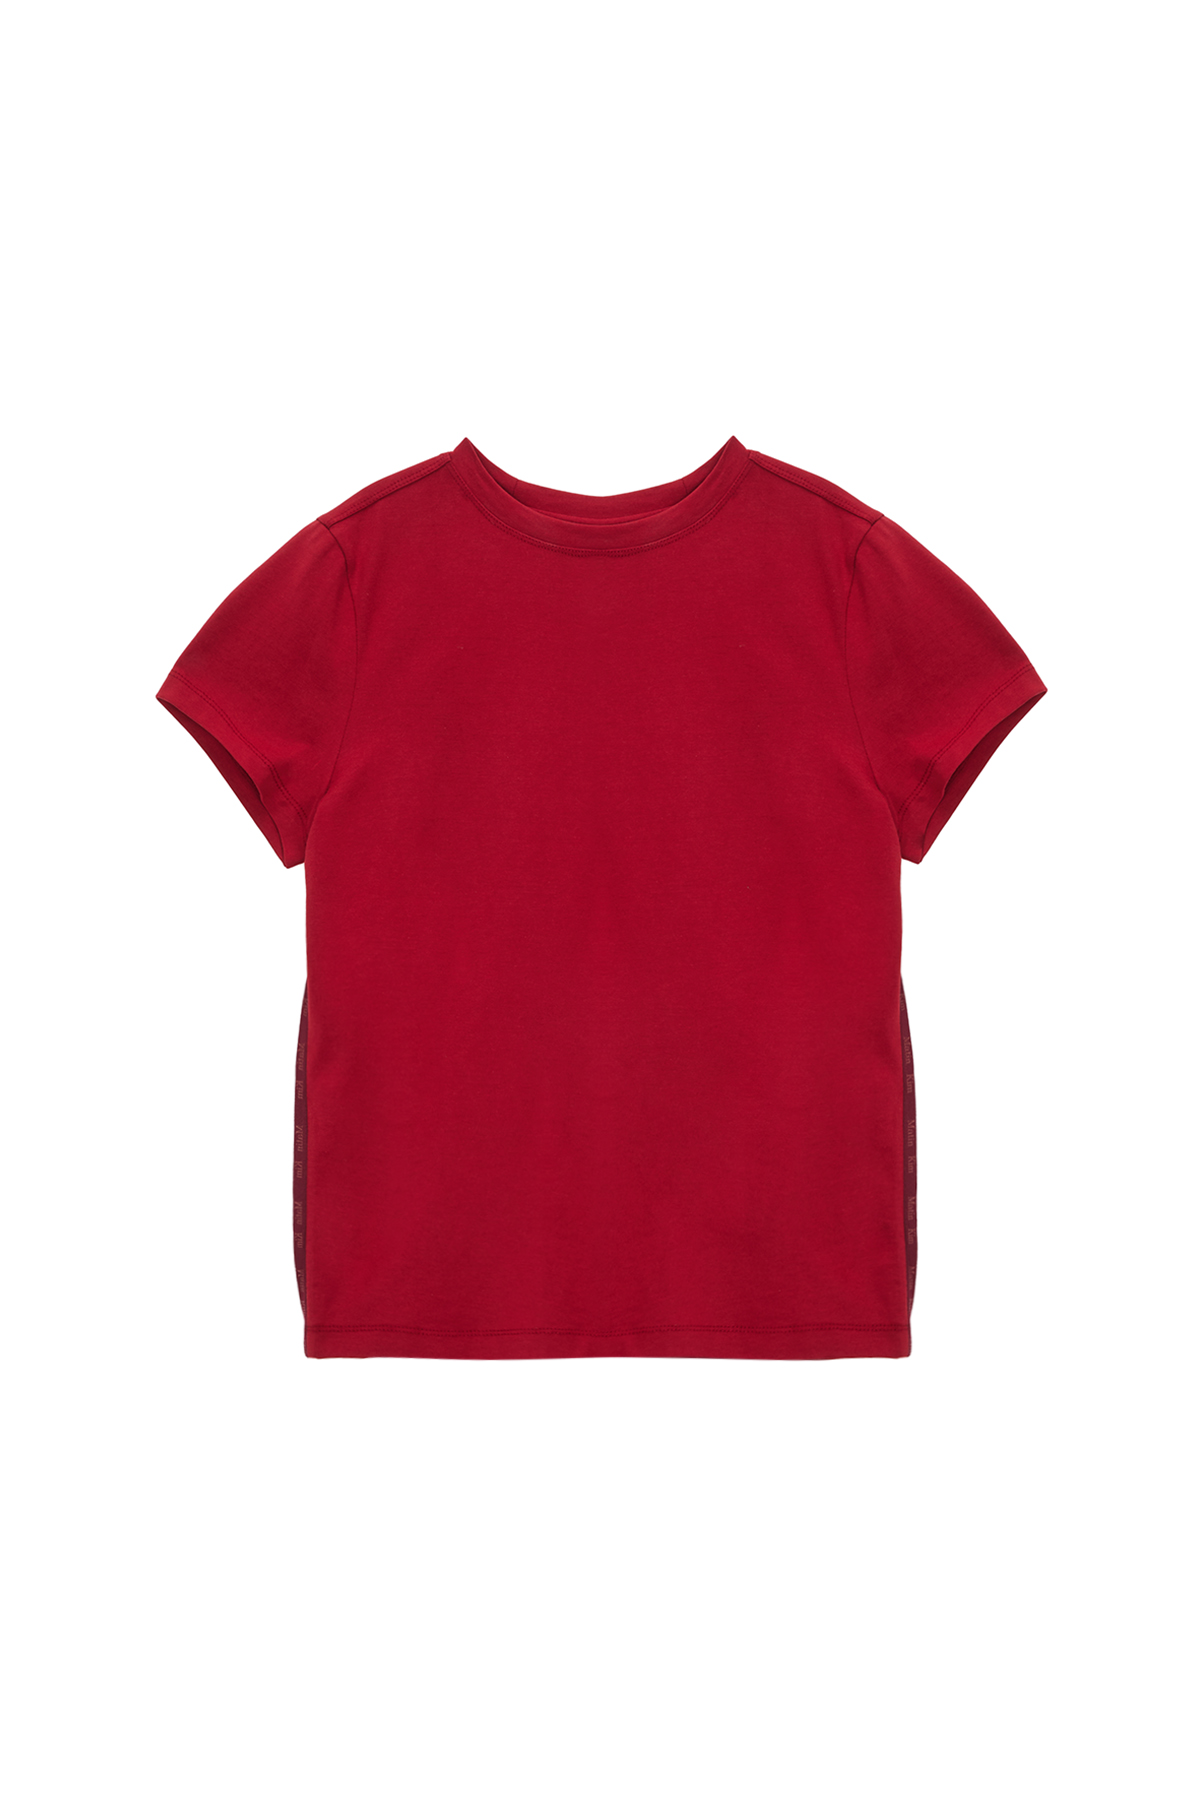 SIDE LOGO TAPING TOP IN RED